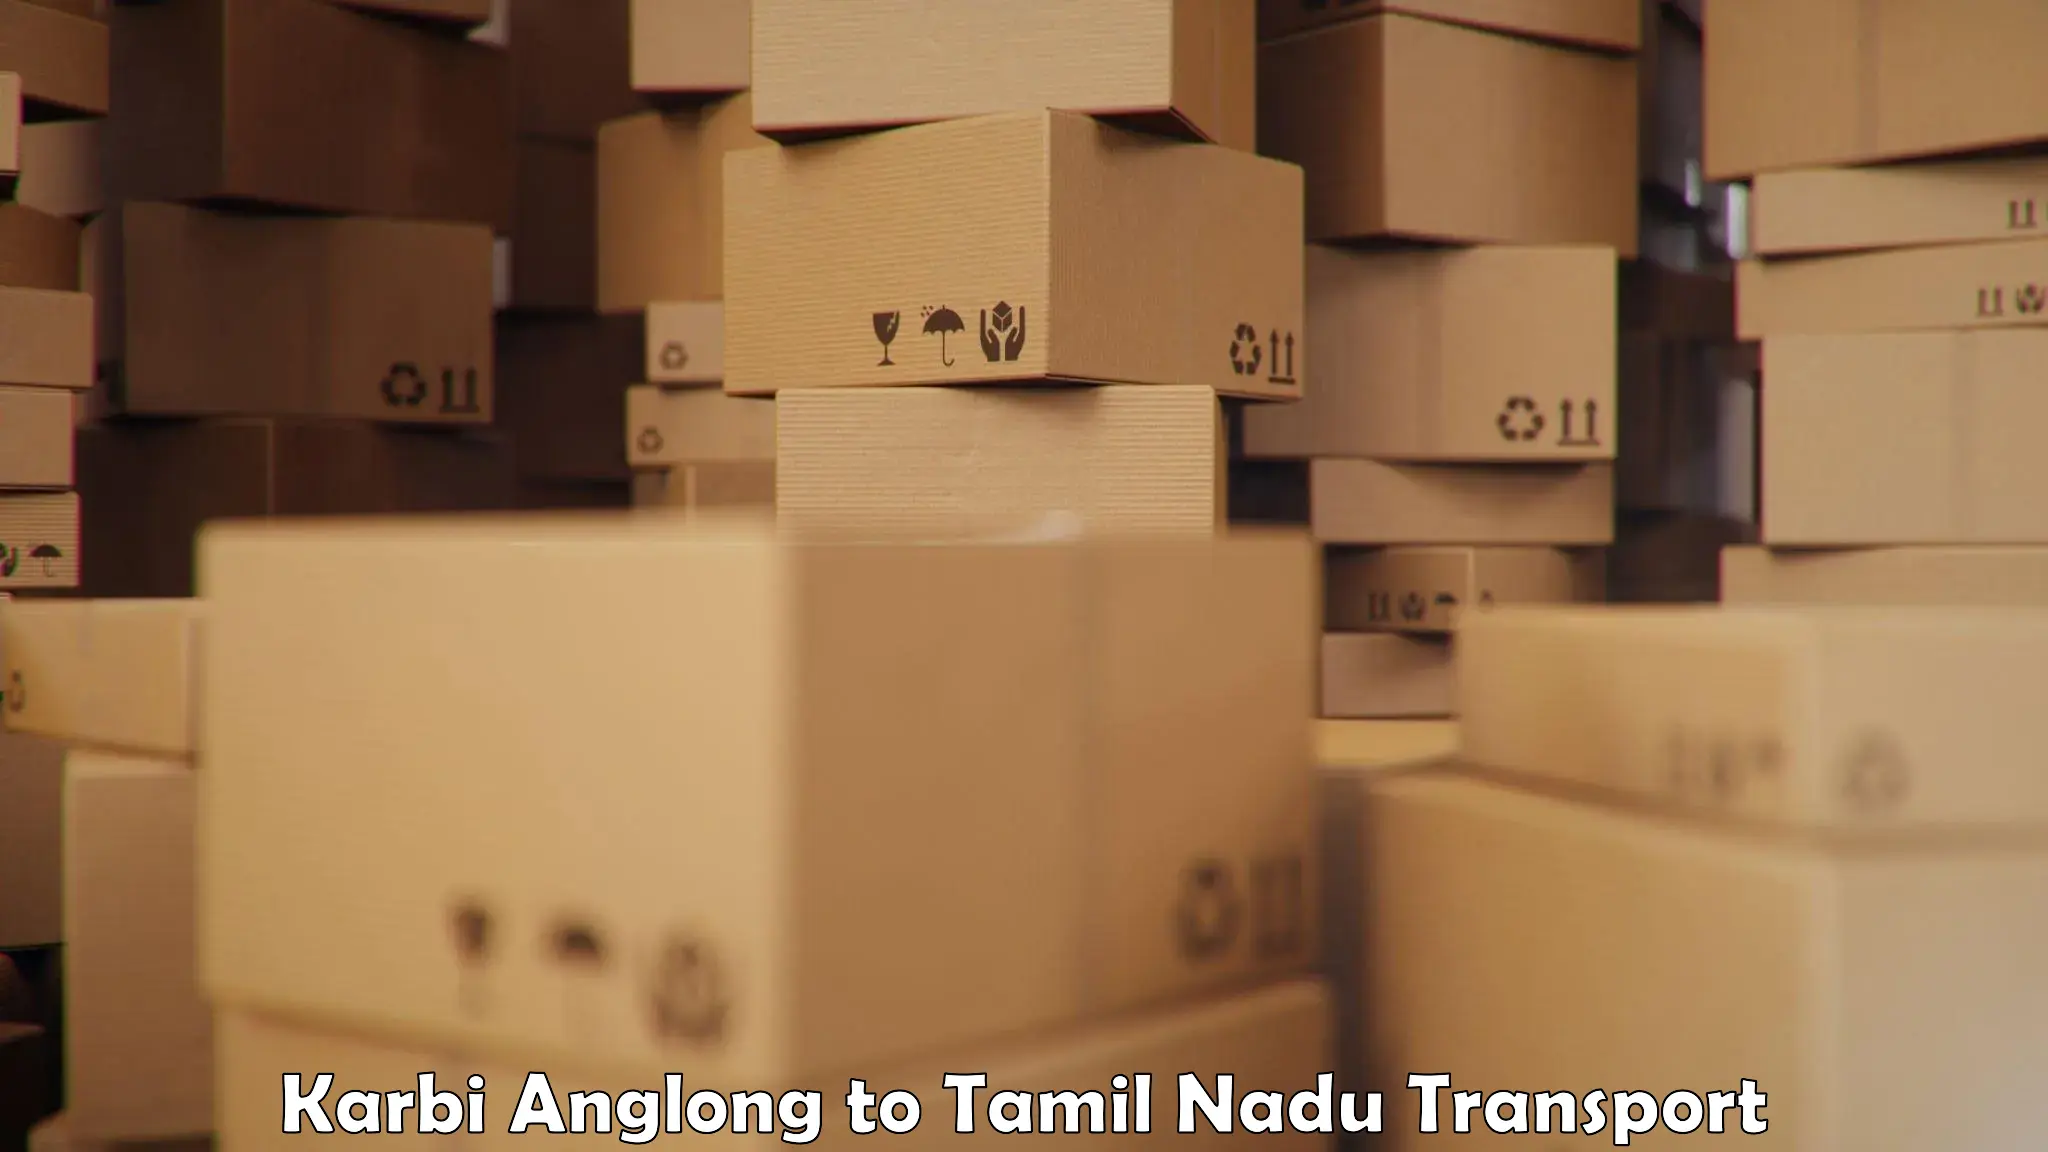 Parcel transport services Karbi Anglong to Shanmugha Arts Science Technology and Research Academy Thanjavur